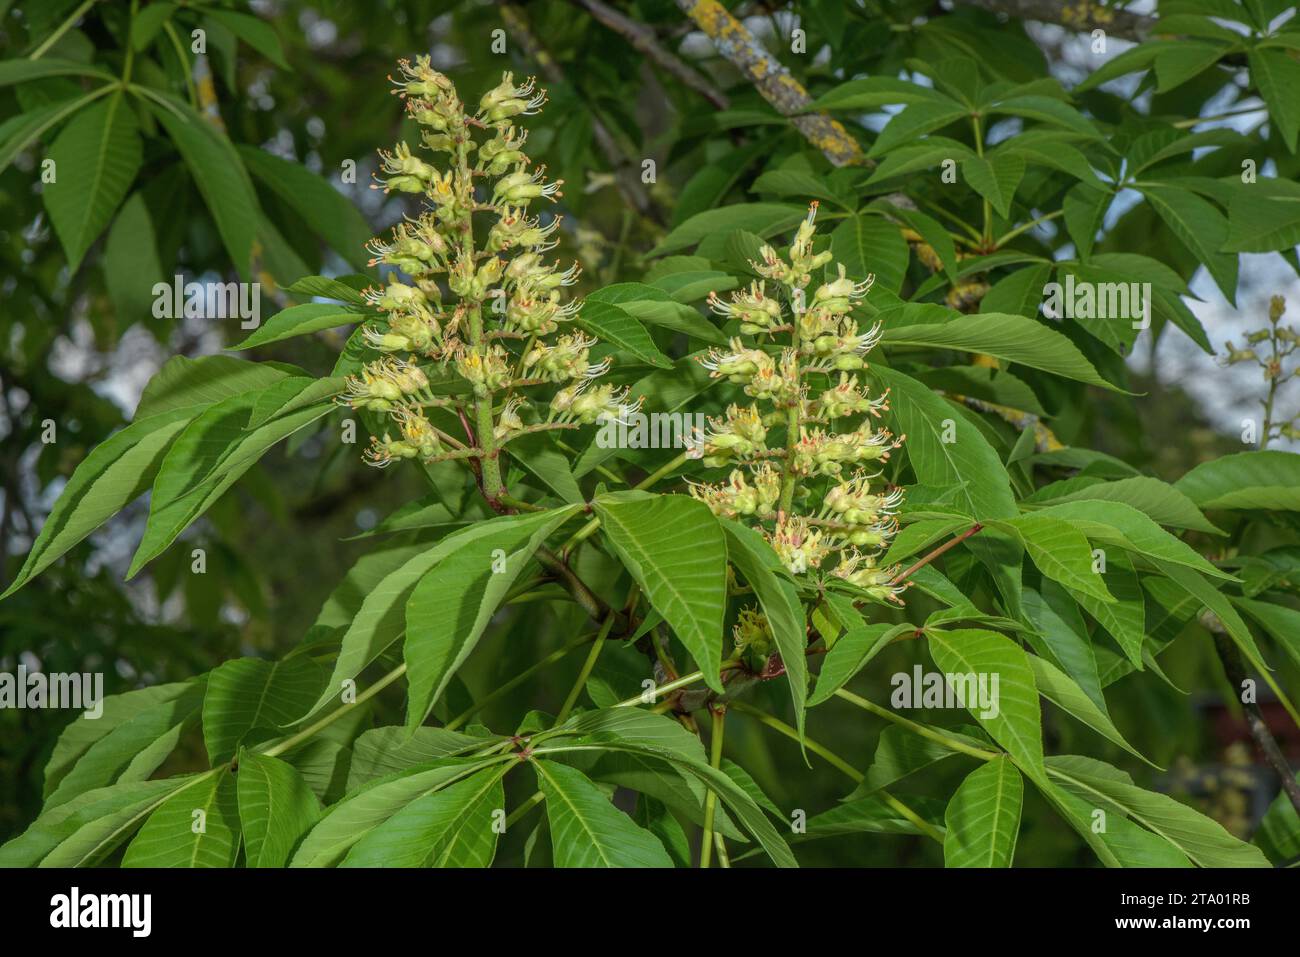 Ohio buckeye, Aesculus glabra in flower. From midwestern USA. Stock Photo